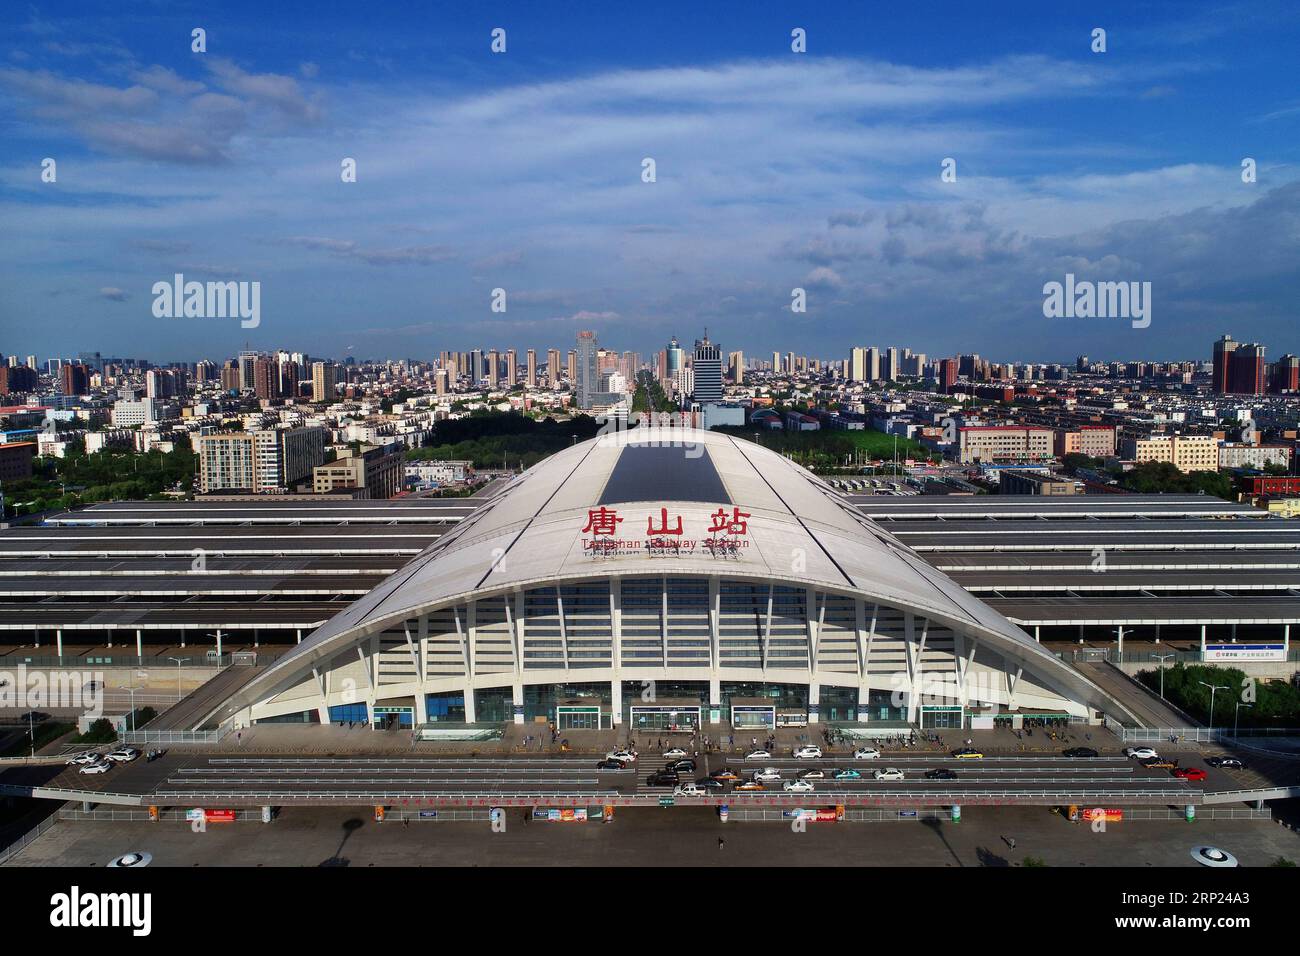 (180817) -- TANGSHAN, Aug. 17, 2018 (Xinhua) -- Photo taken on Aug. 15, 2018 shows the Tangshan railway station in Tangshan, north China s Hebei Province. In the early hours of July 28, 1976, a 7.8-magnitude earthquake struck the city in Hebei Province, killing over 242,000 people. (Xinhua/Dong Jun) CHINA-HEBEI-TANGSHAN-AERIAL VIEW (CN) PUBLICATIONxNOTxINxCHN Stock Photo